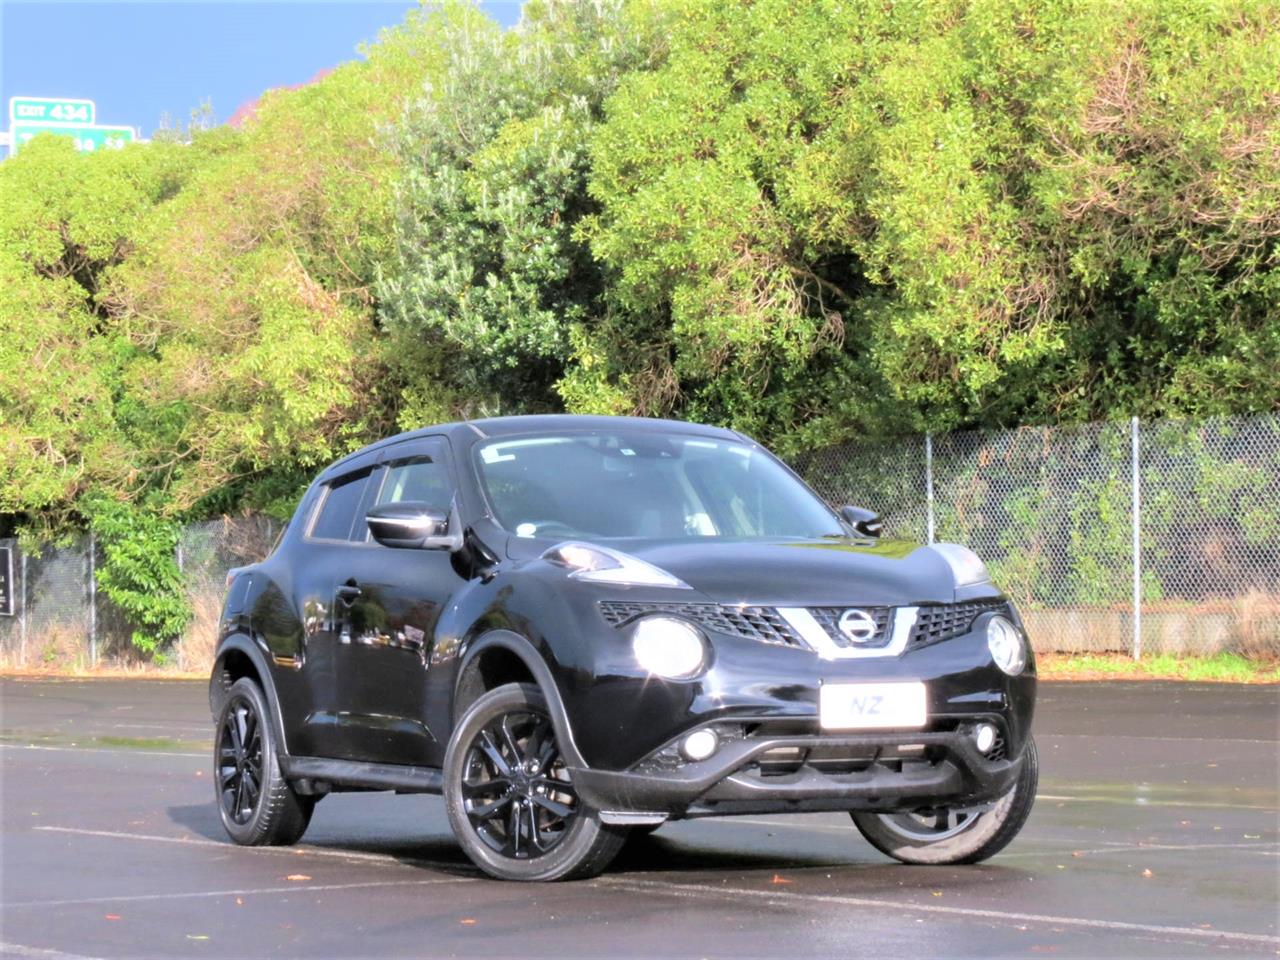 NZC 2016 Nissan JUKE just arrived to Auckland